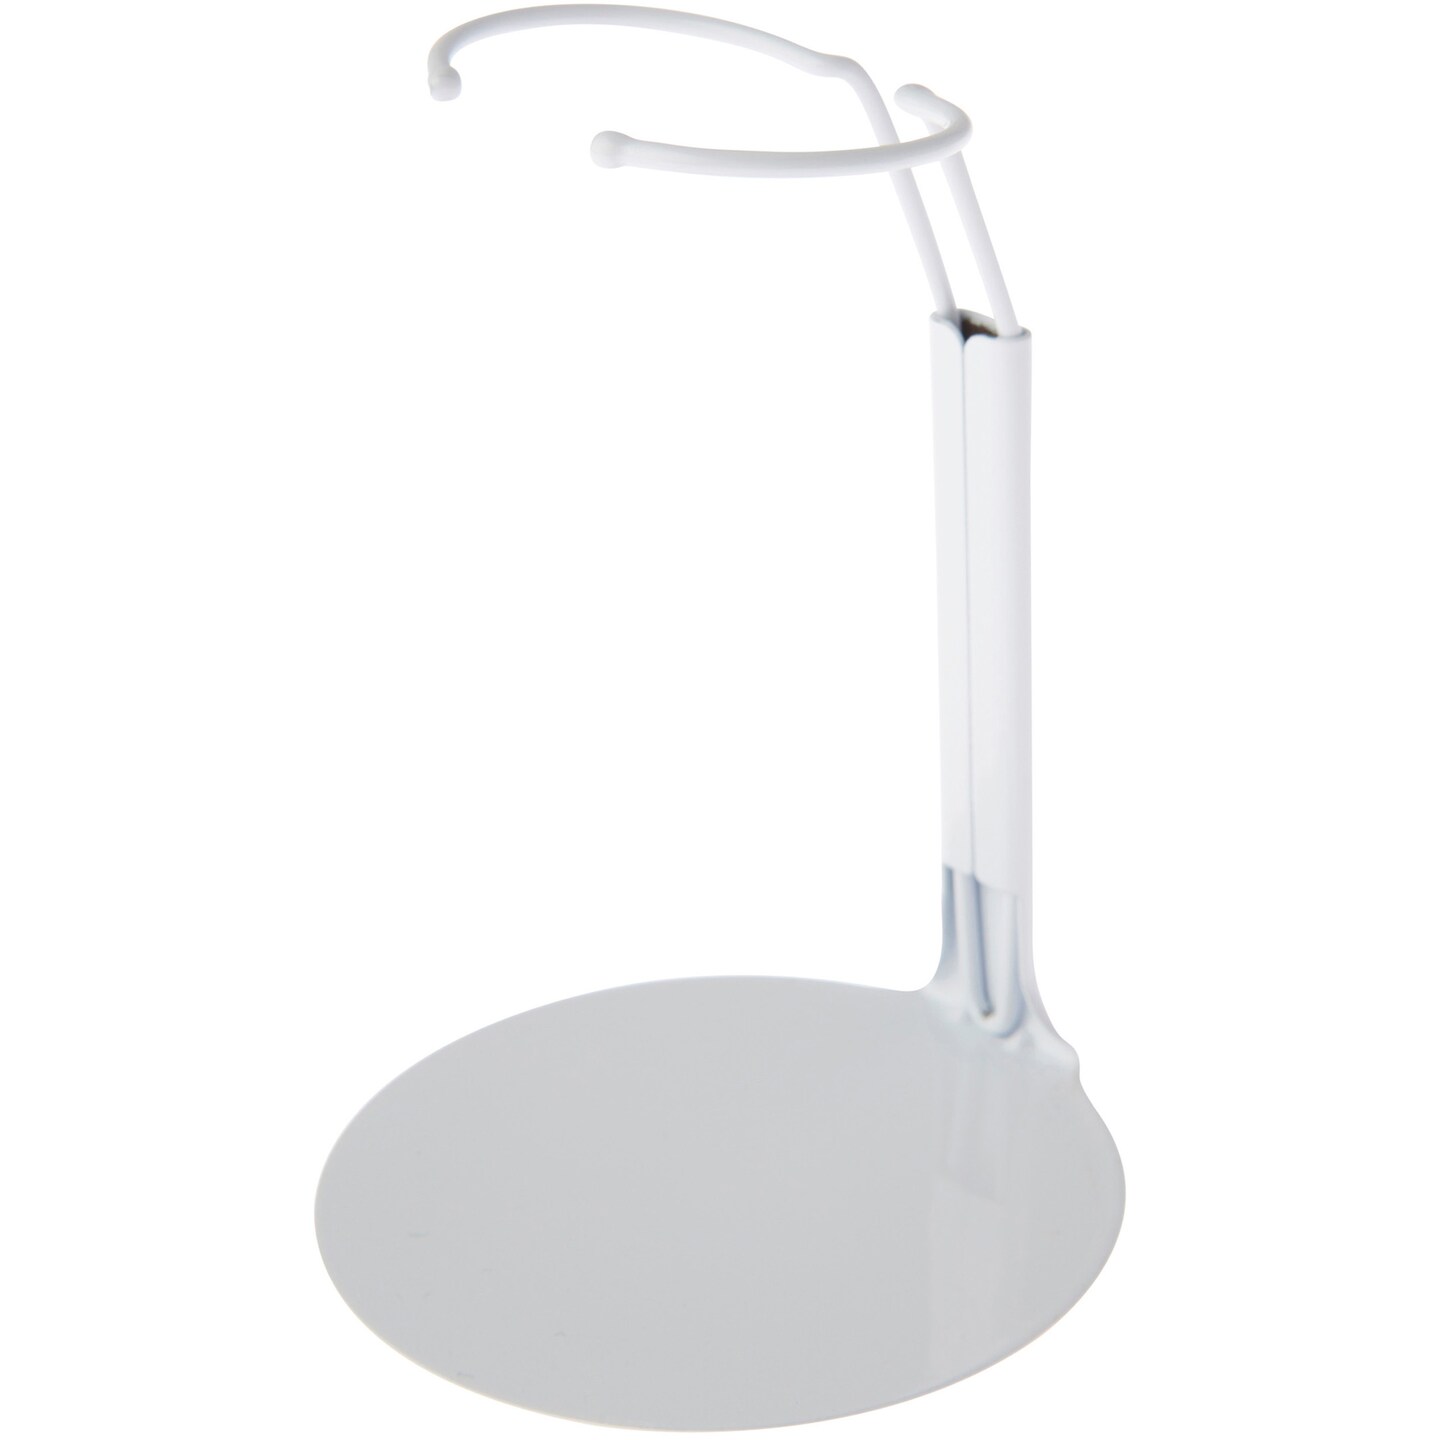 Plymor DSP-4175W White Adjustable Doll Stand, fits 7, 7.5, 8, 8.5, and 9 inch Dolls or Action Figures, Waist is 1.75 to 2.25 inches wide, 5 to 6 inches around